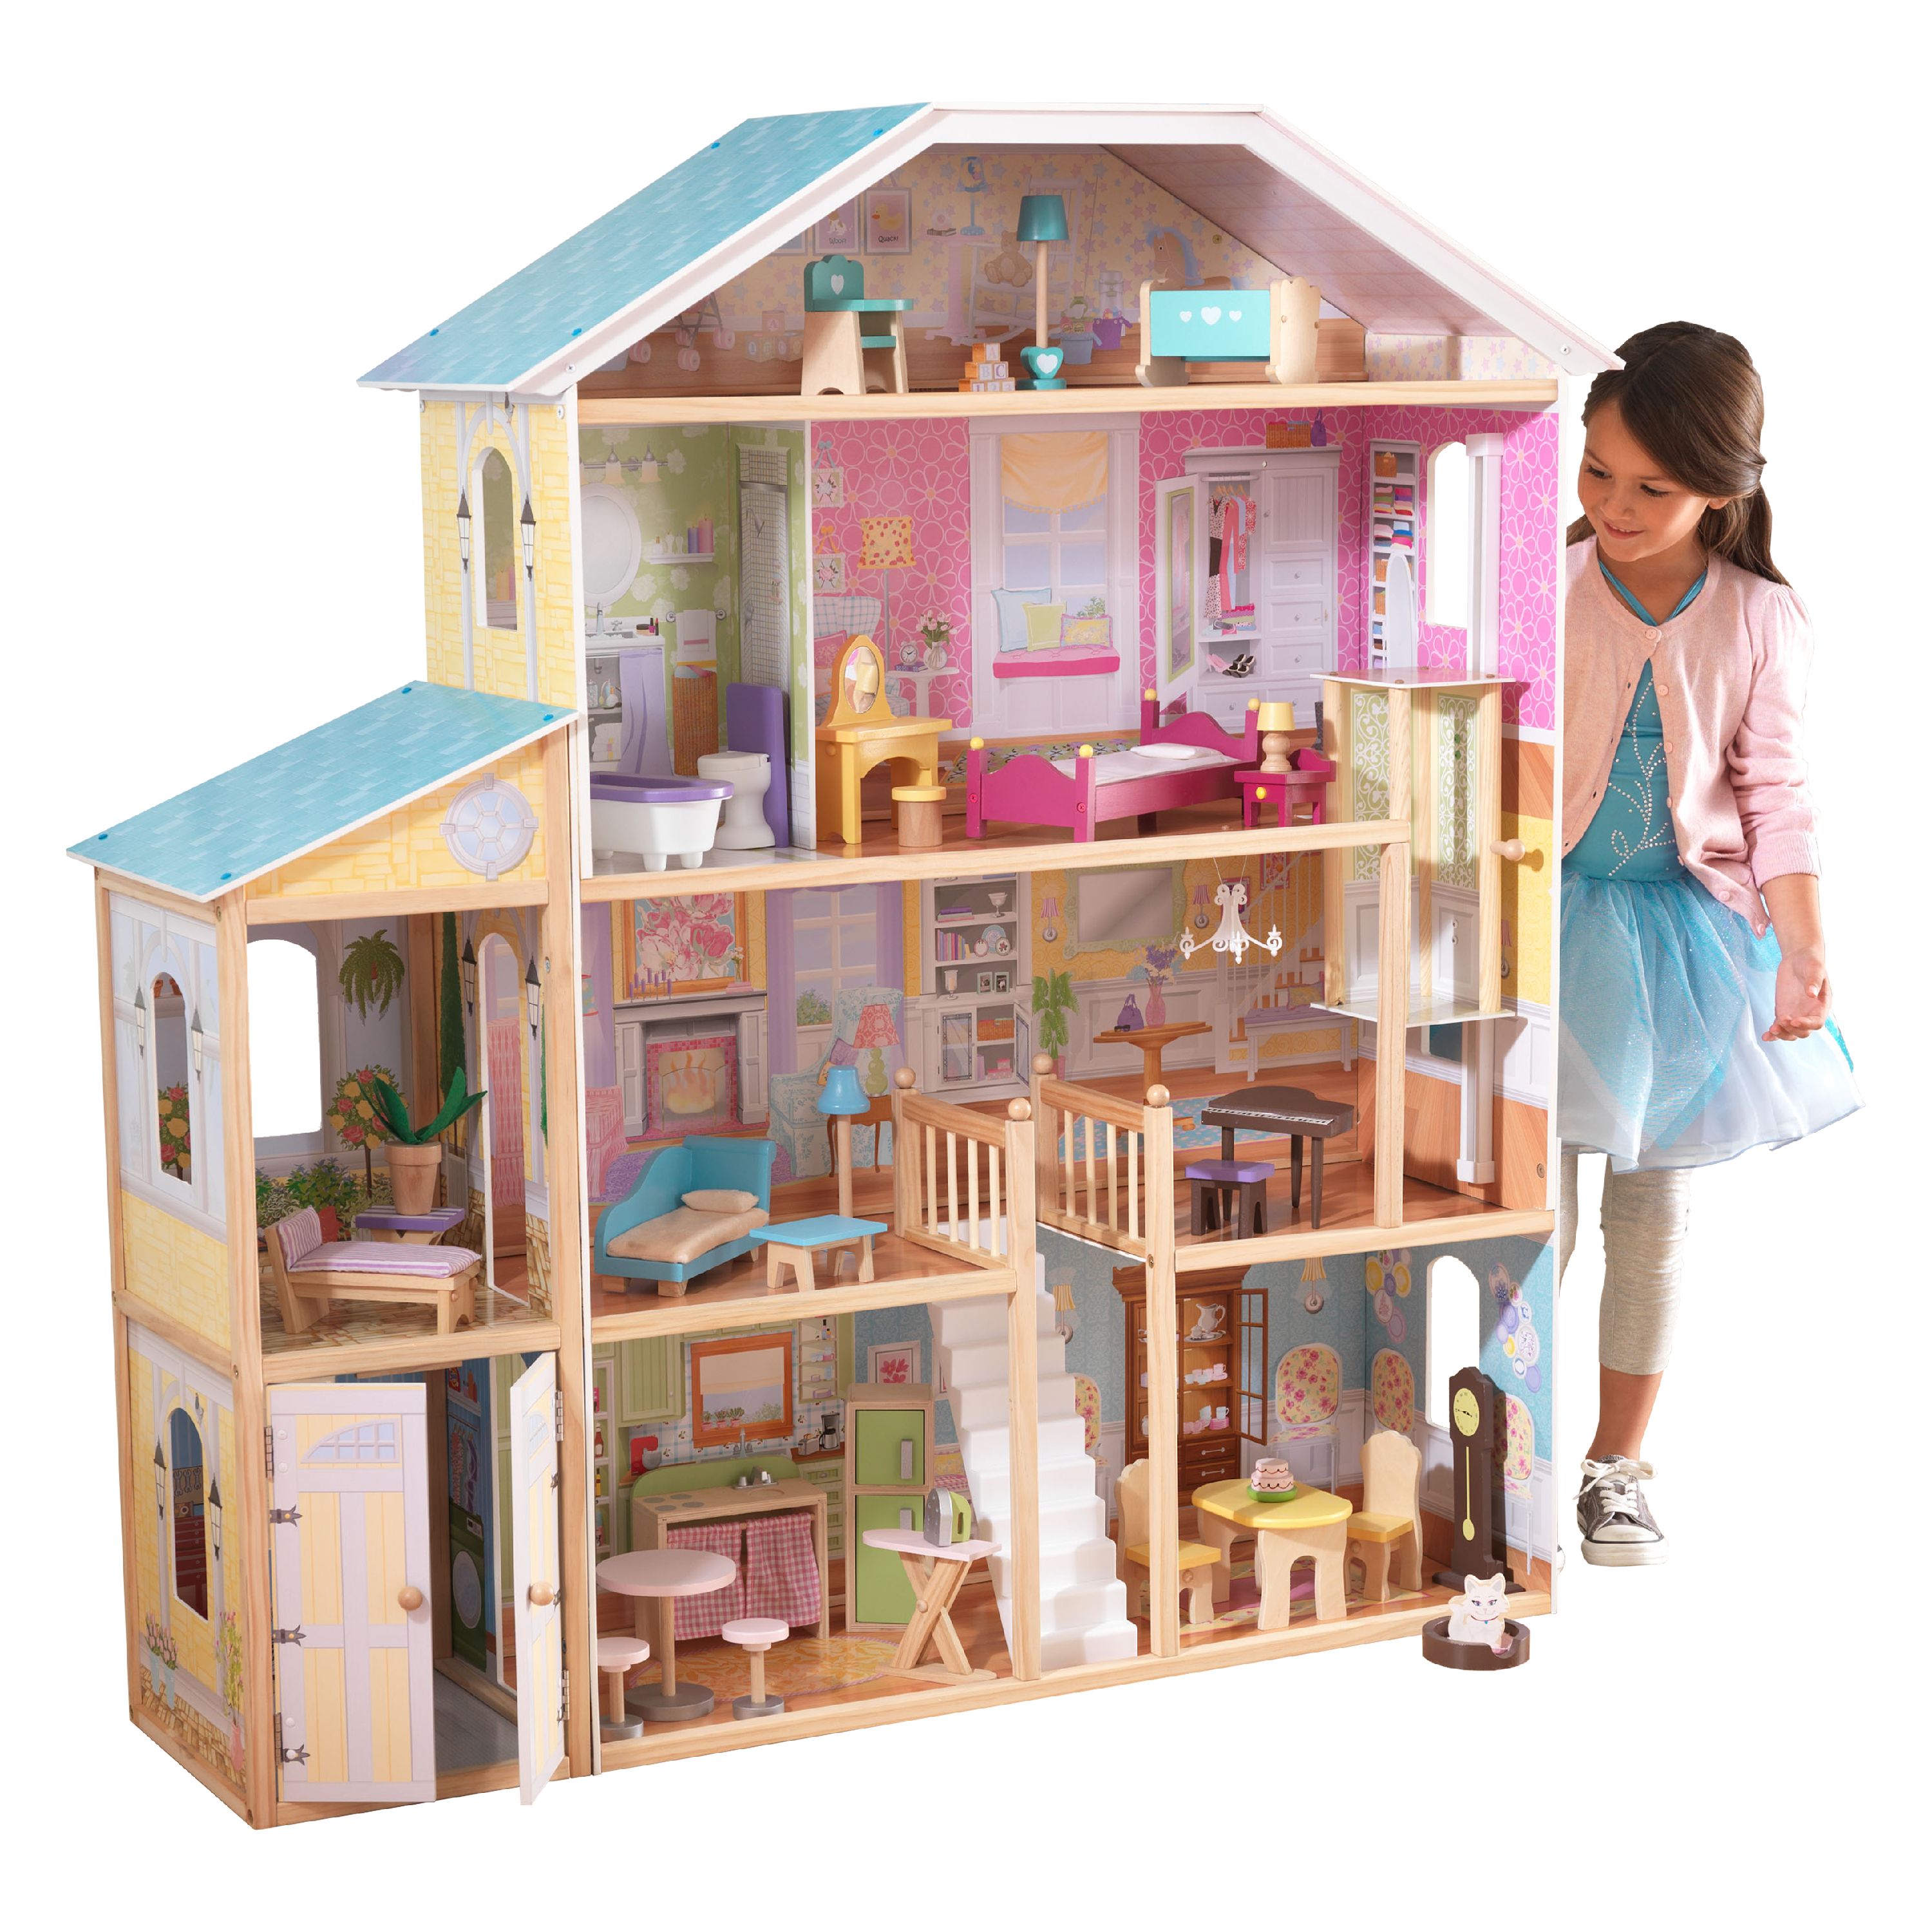 KidKraft Majestic Mansion Wooden Dollhouse with 34 Accessories - image 1 of 9